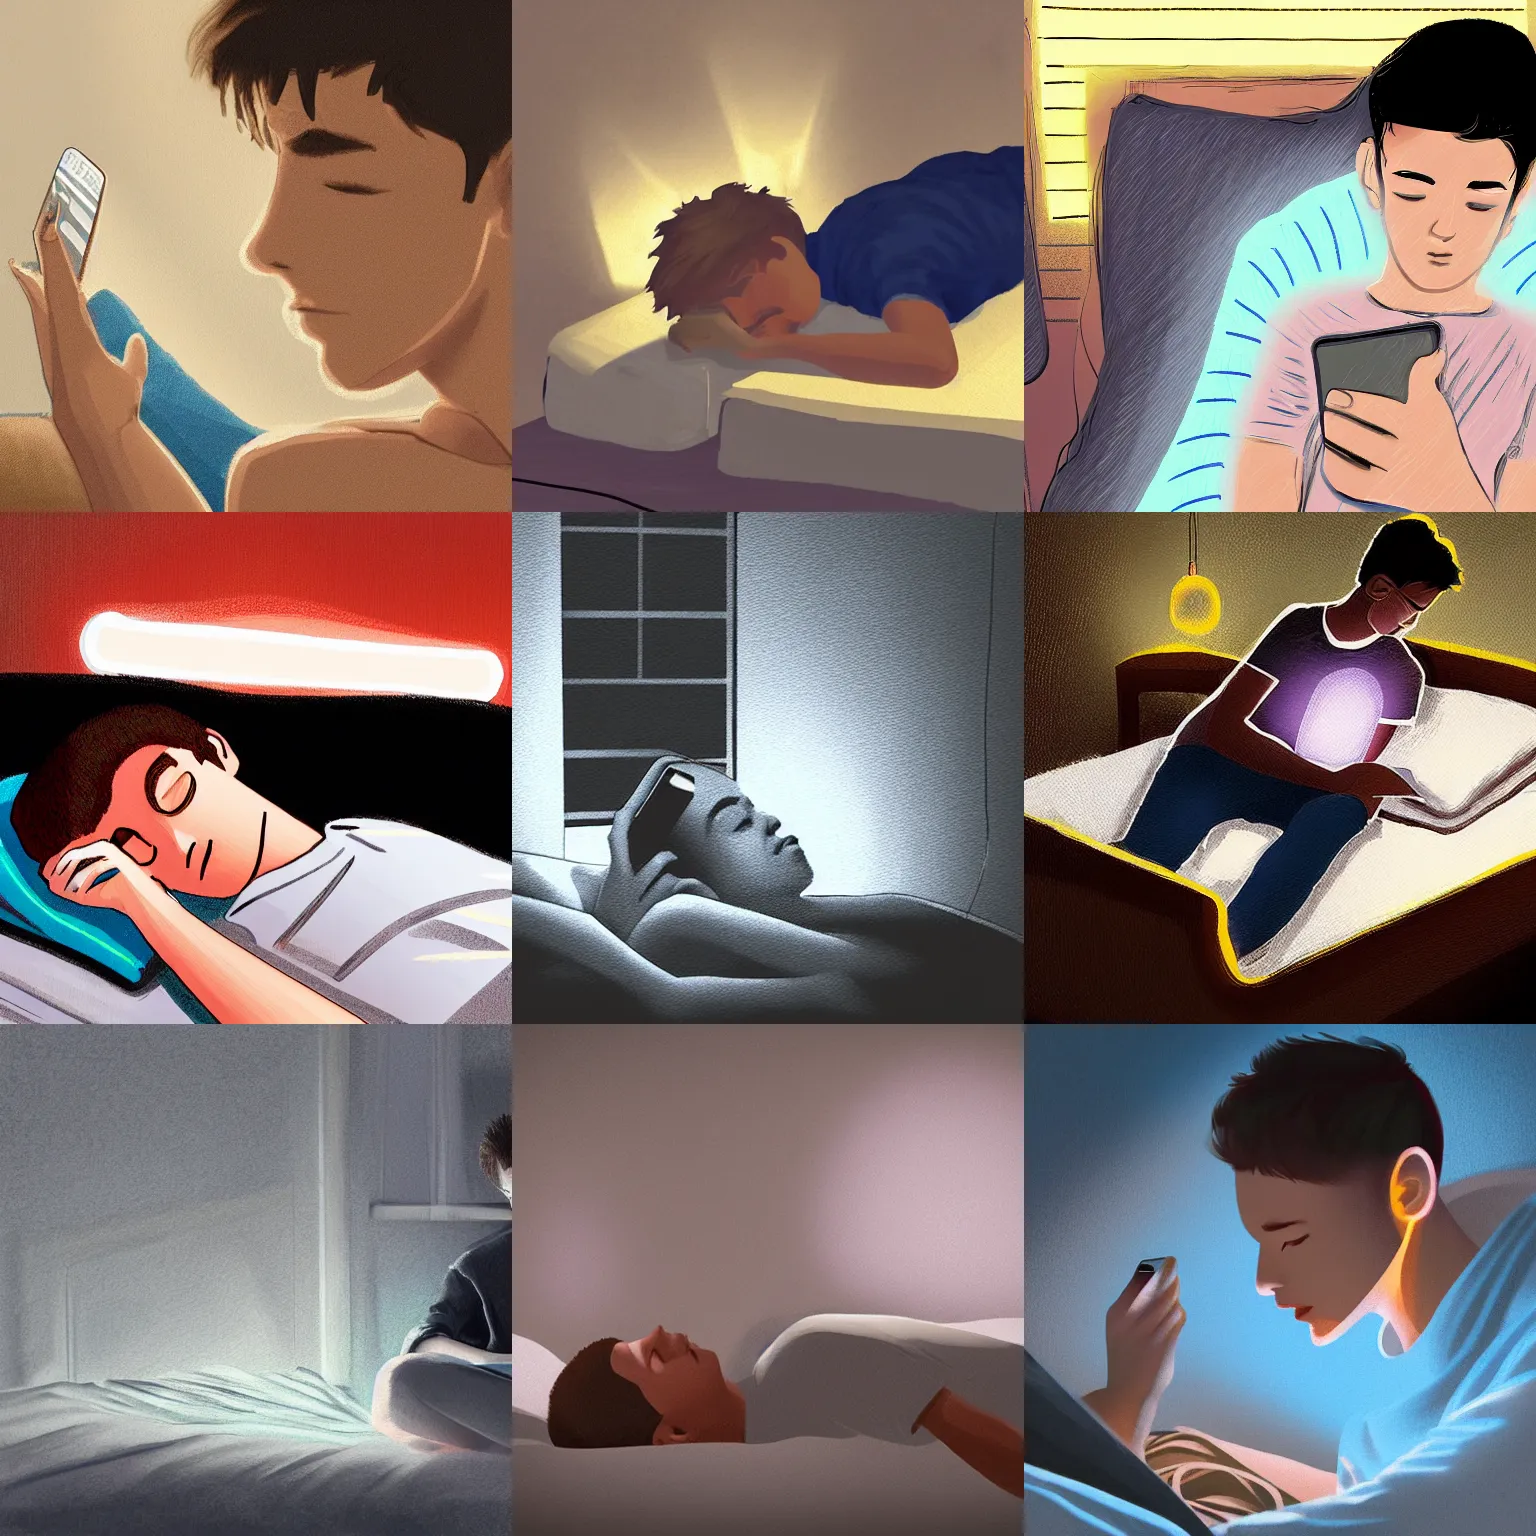 Prompt: a far away photo of a 1 6 - year - old boy laying in his bed with the lights turned off, his covers on looking at phone while the light from his phone shows his face, digital art